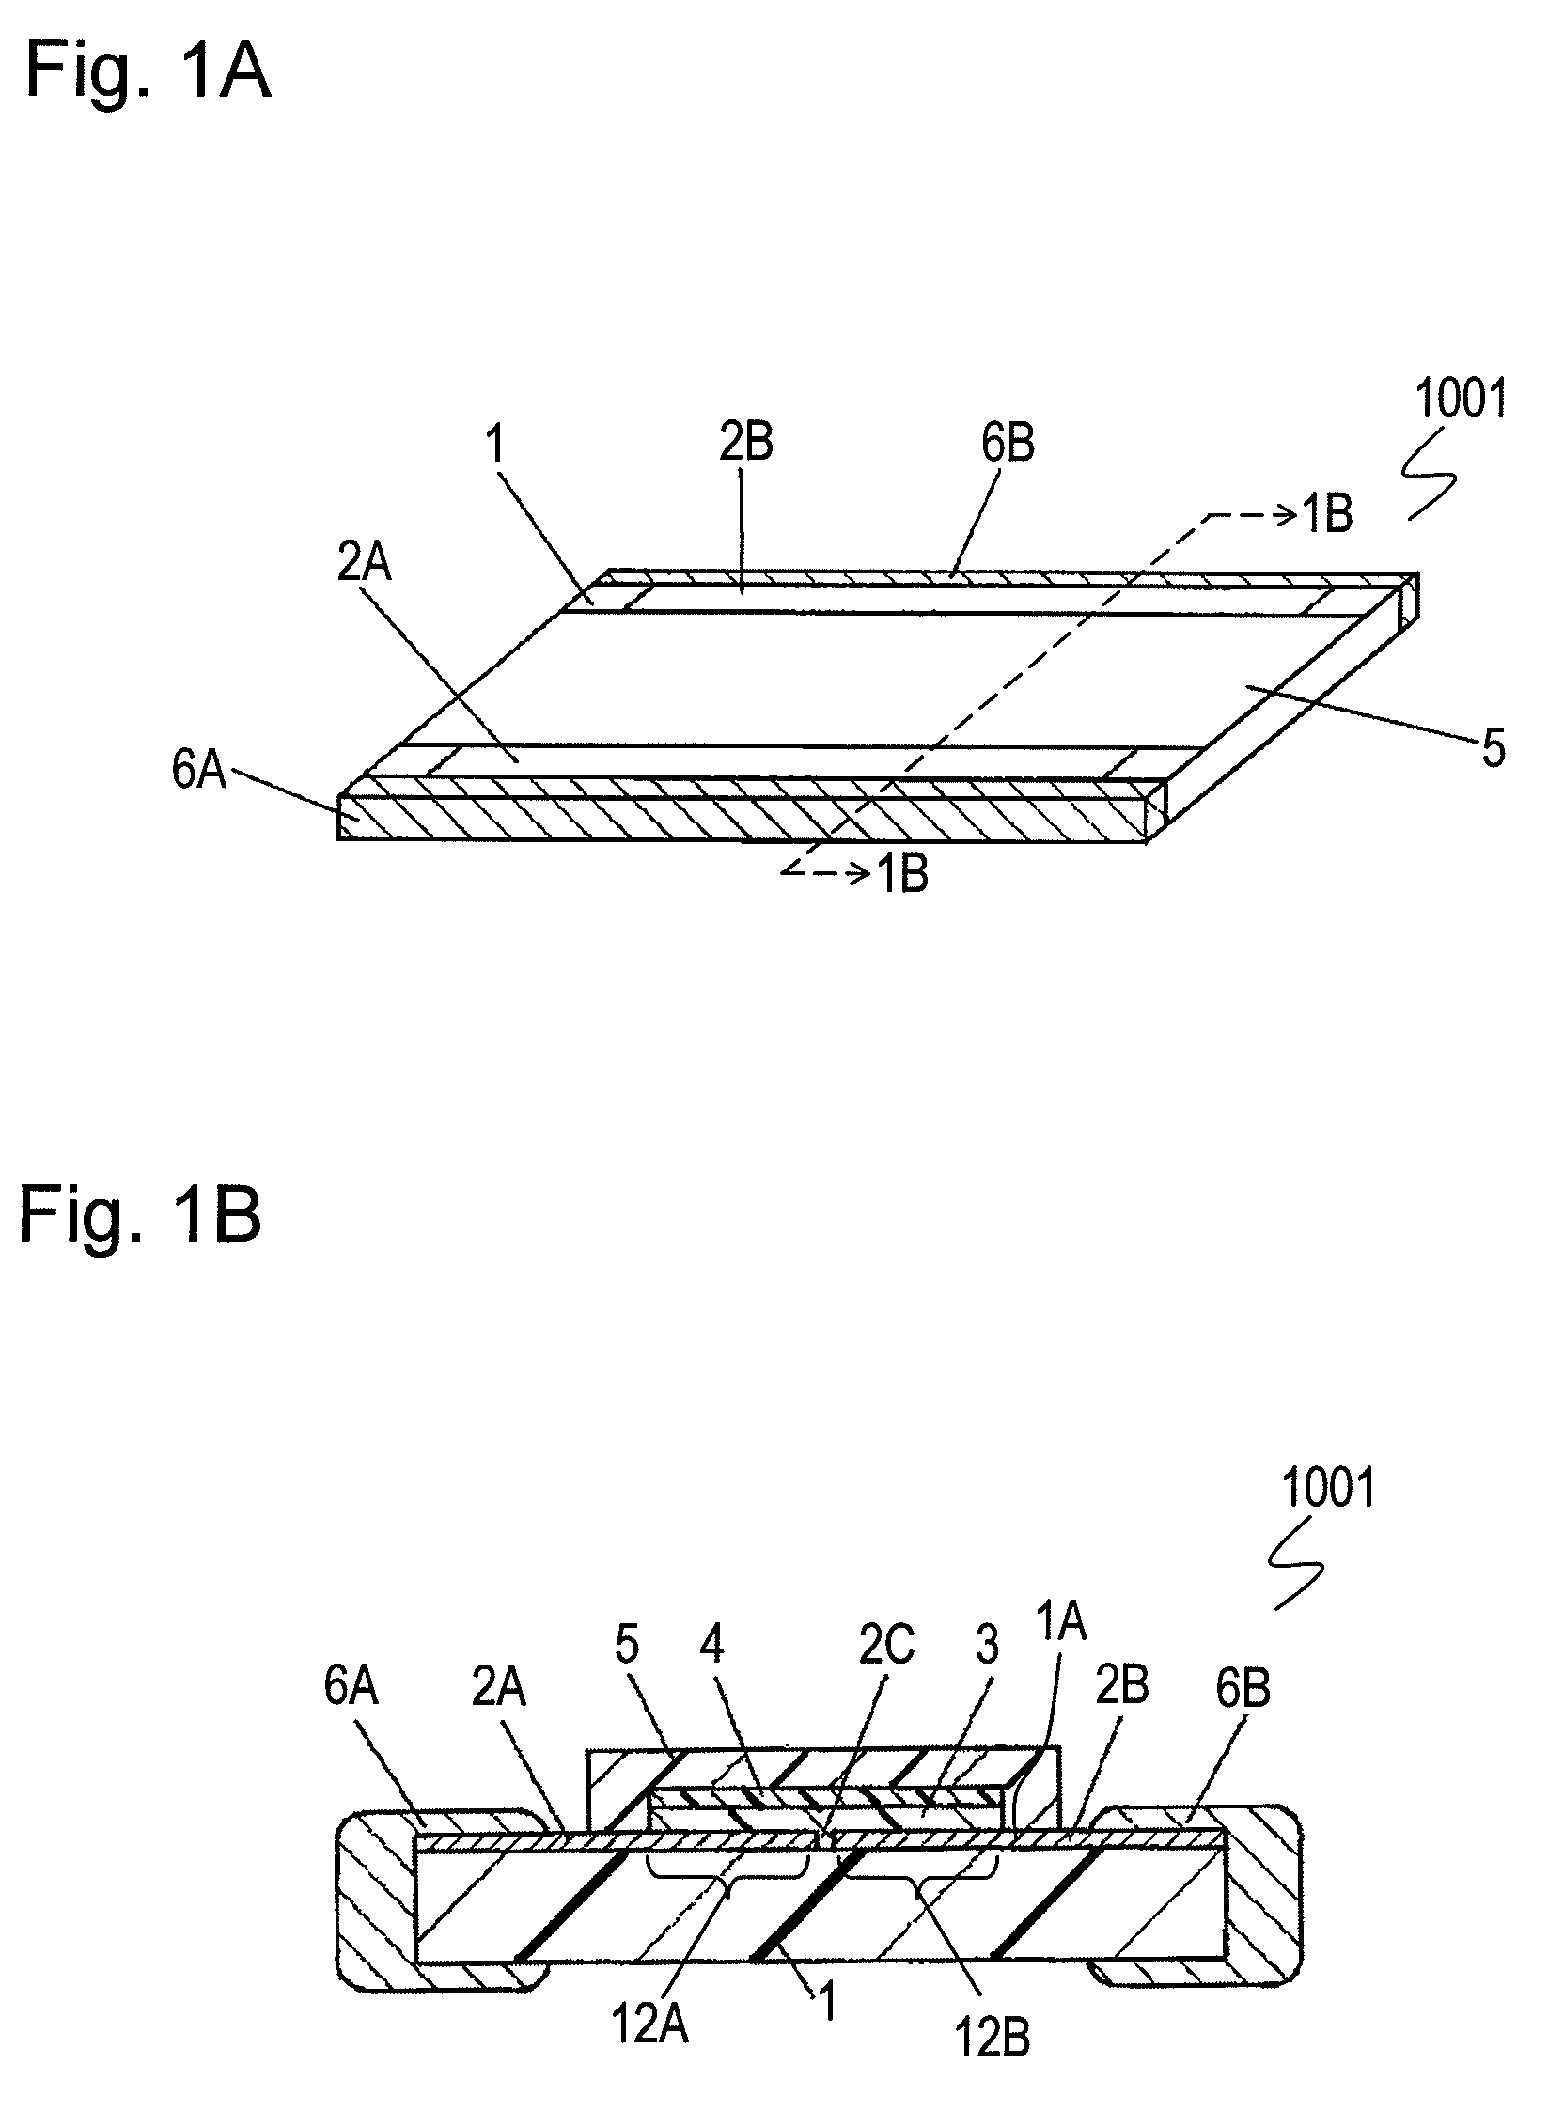 Anti-static part and its manufacturing method